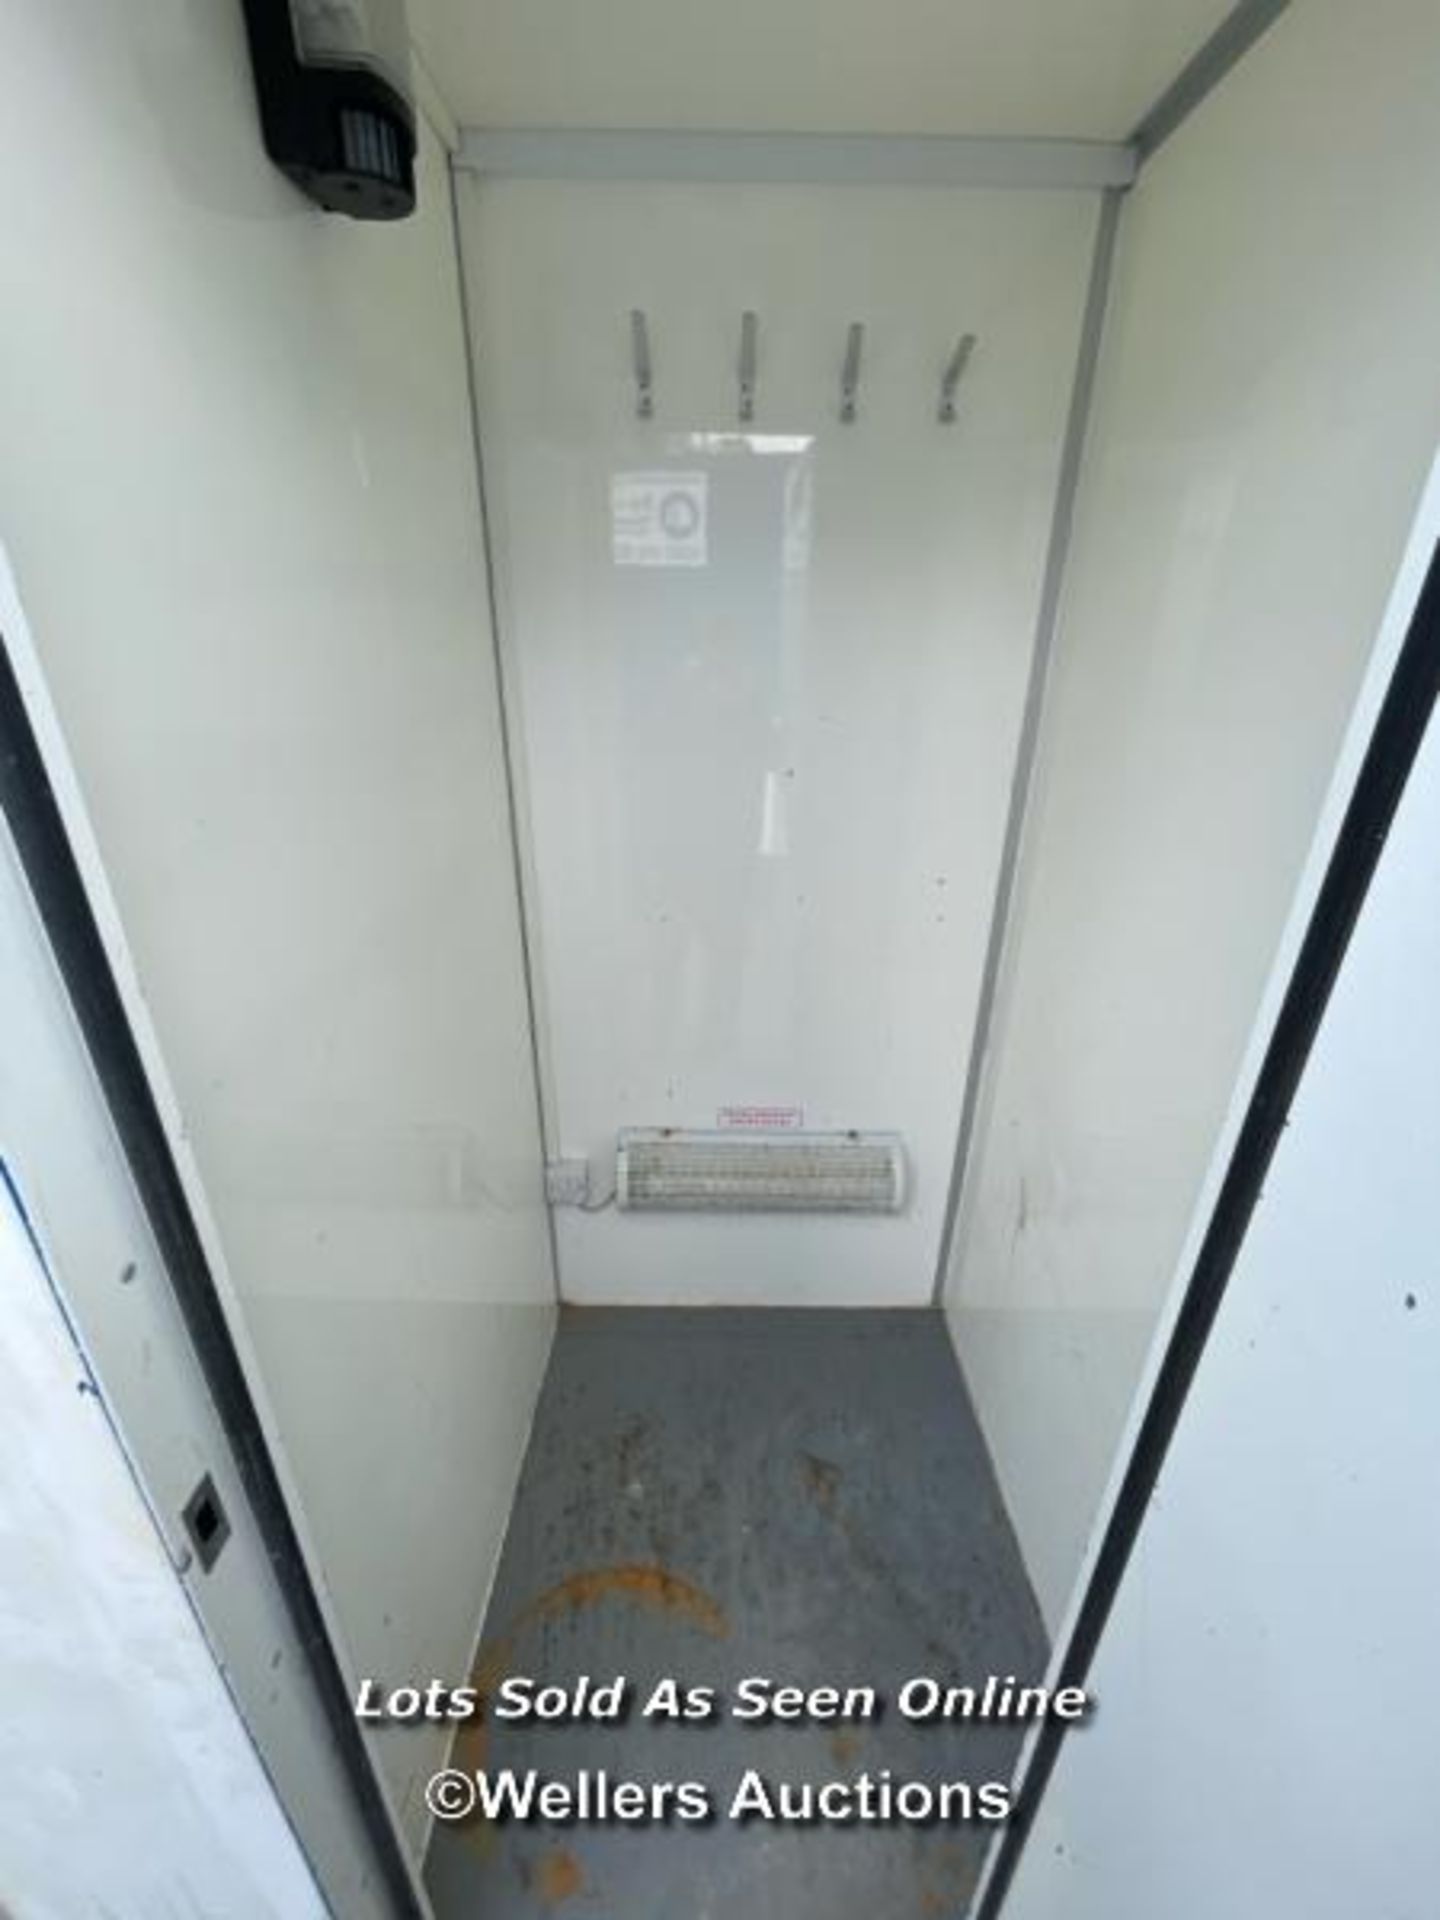 6 PERSON 12 X 7.5FT AJC EASY CABIN TOWABLE WELFARE UNIT, INCLUDES WASH BASIN, KETTLE, MICROWAVE, - Image 14 of 19